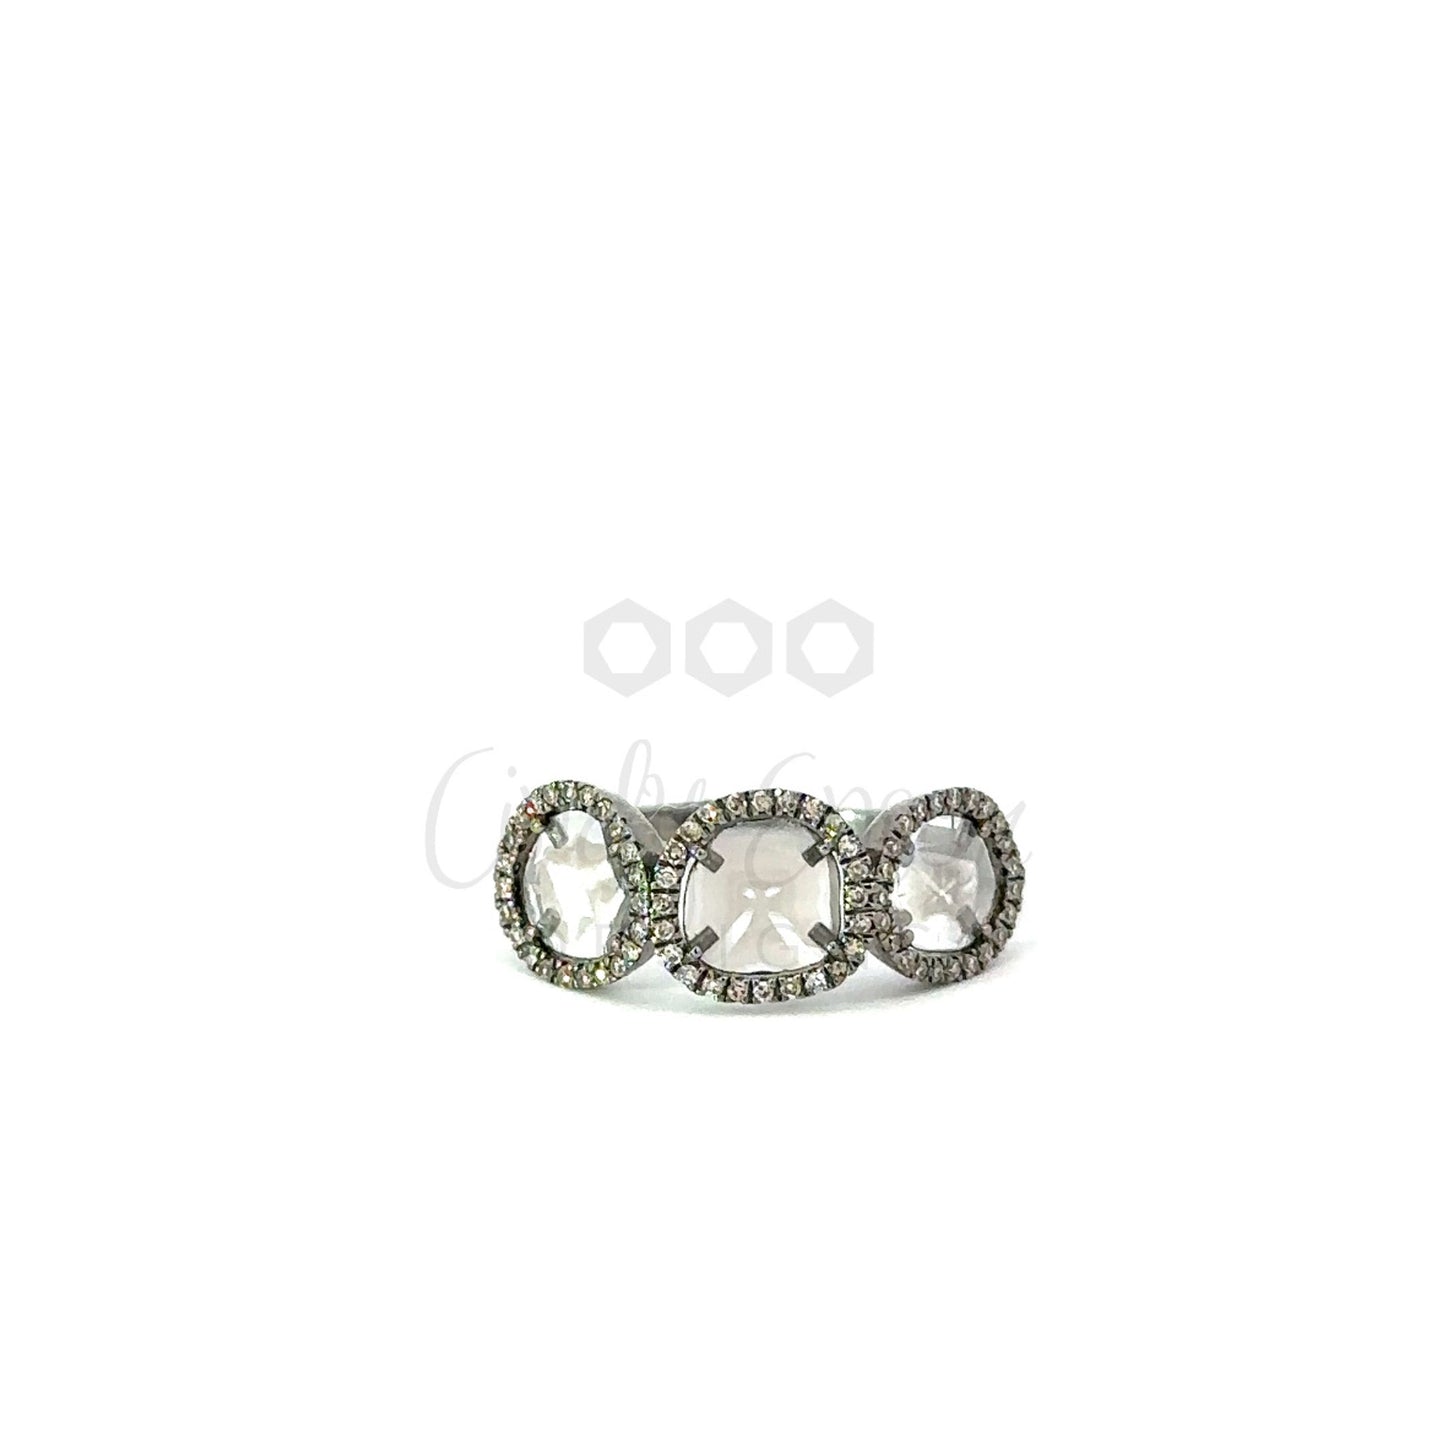 Triple Sliced Diamond Ring with Pave Border